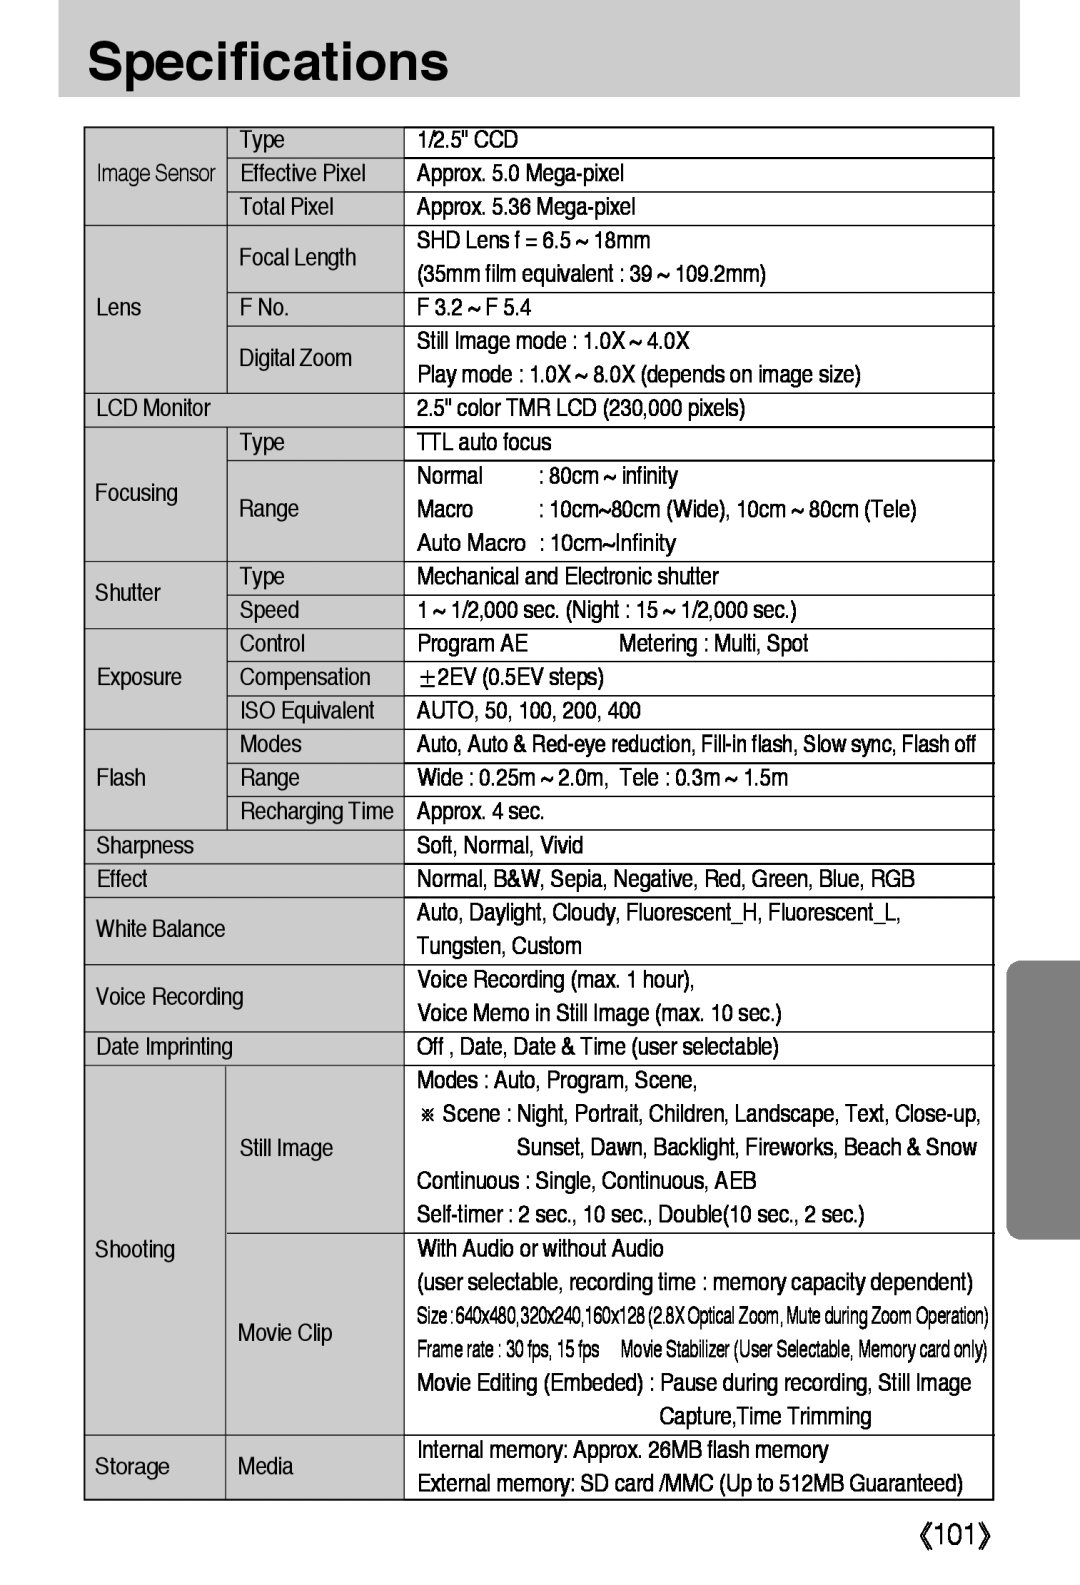 Samsung L50 user manual Specifications, 《101》 